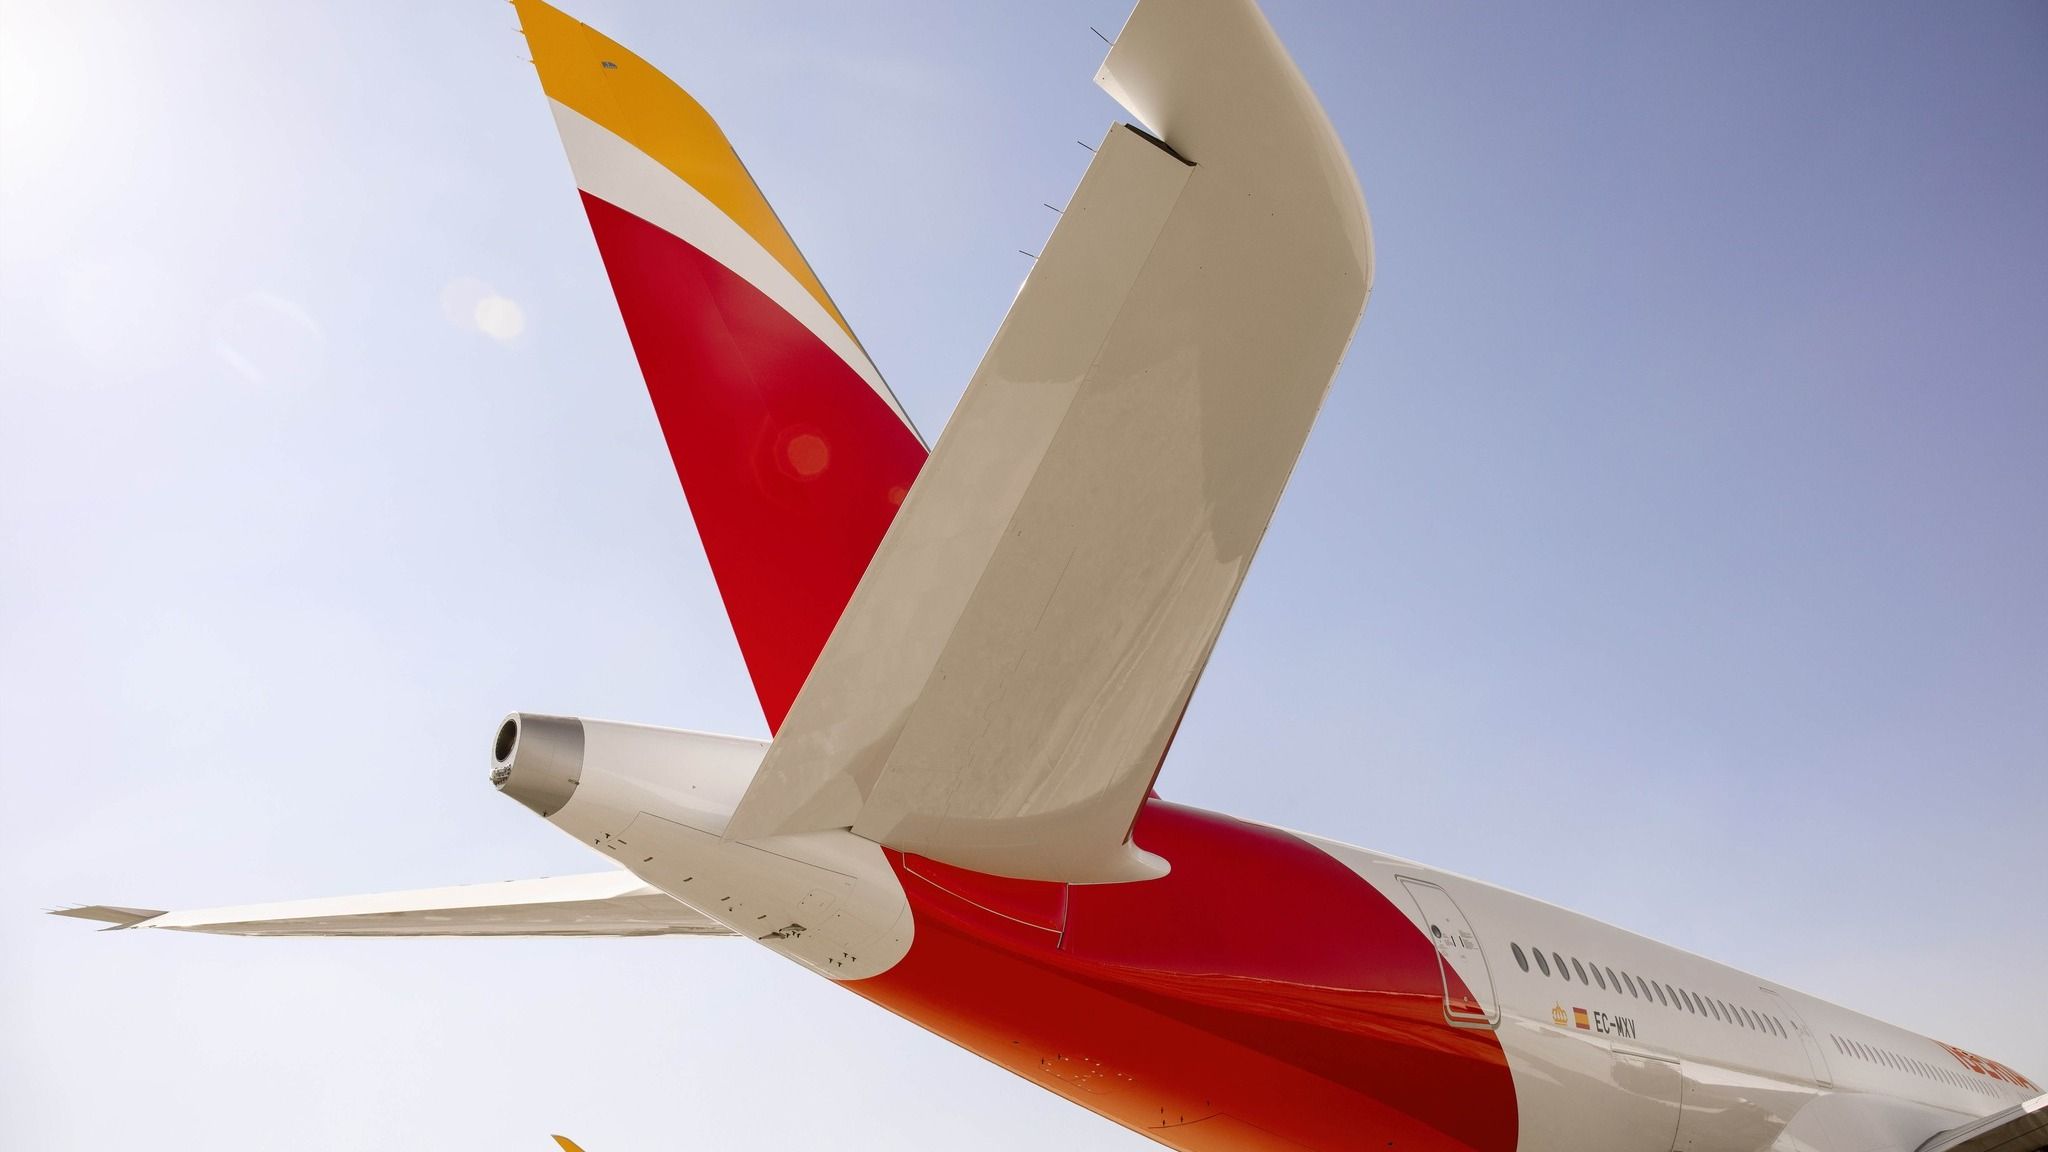 The tail of an Iberia aircraft.